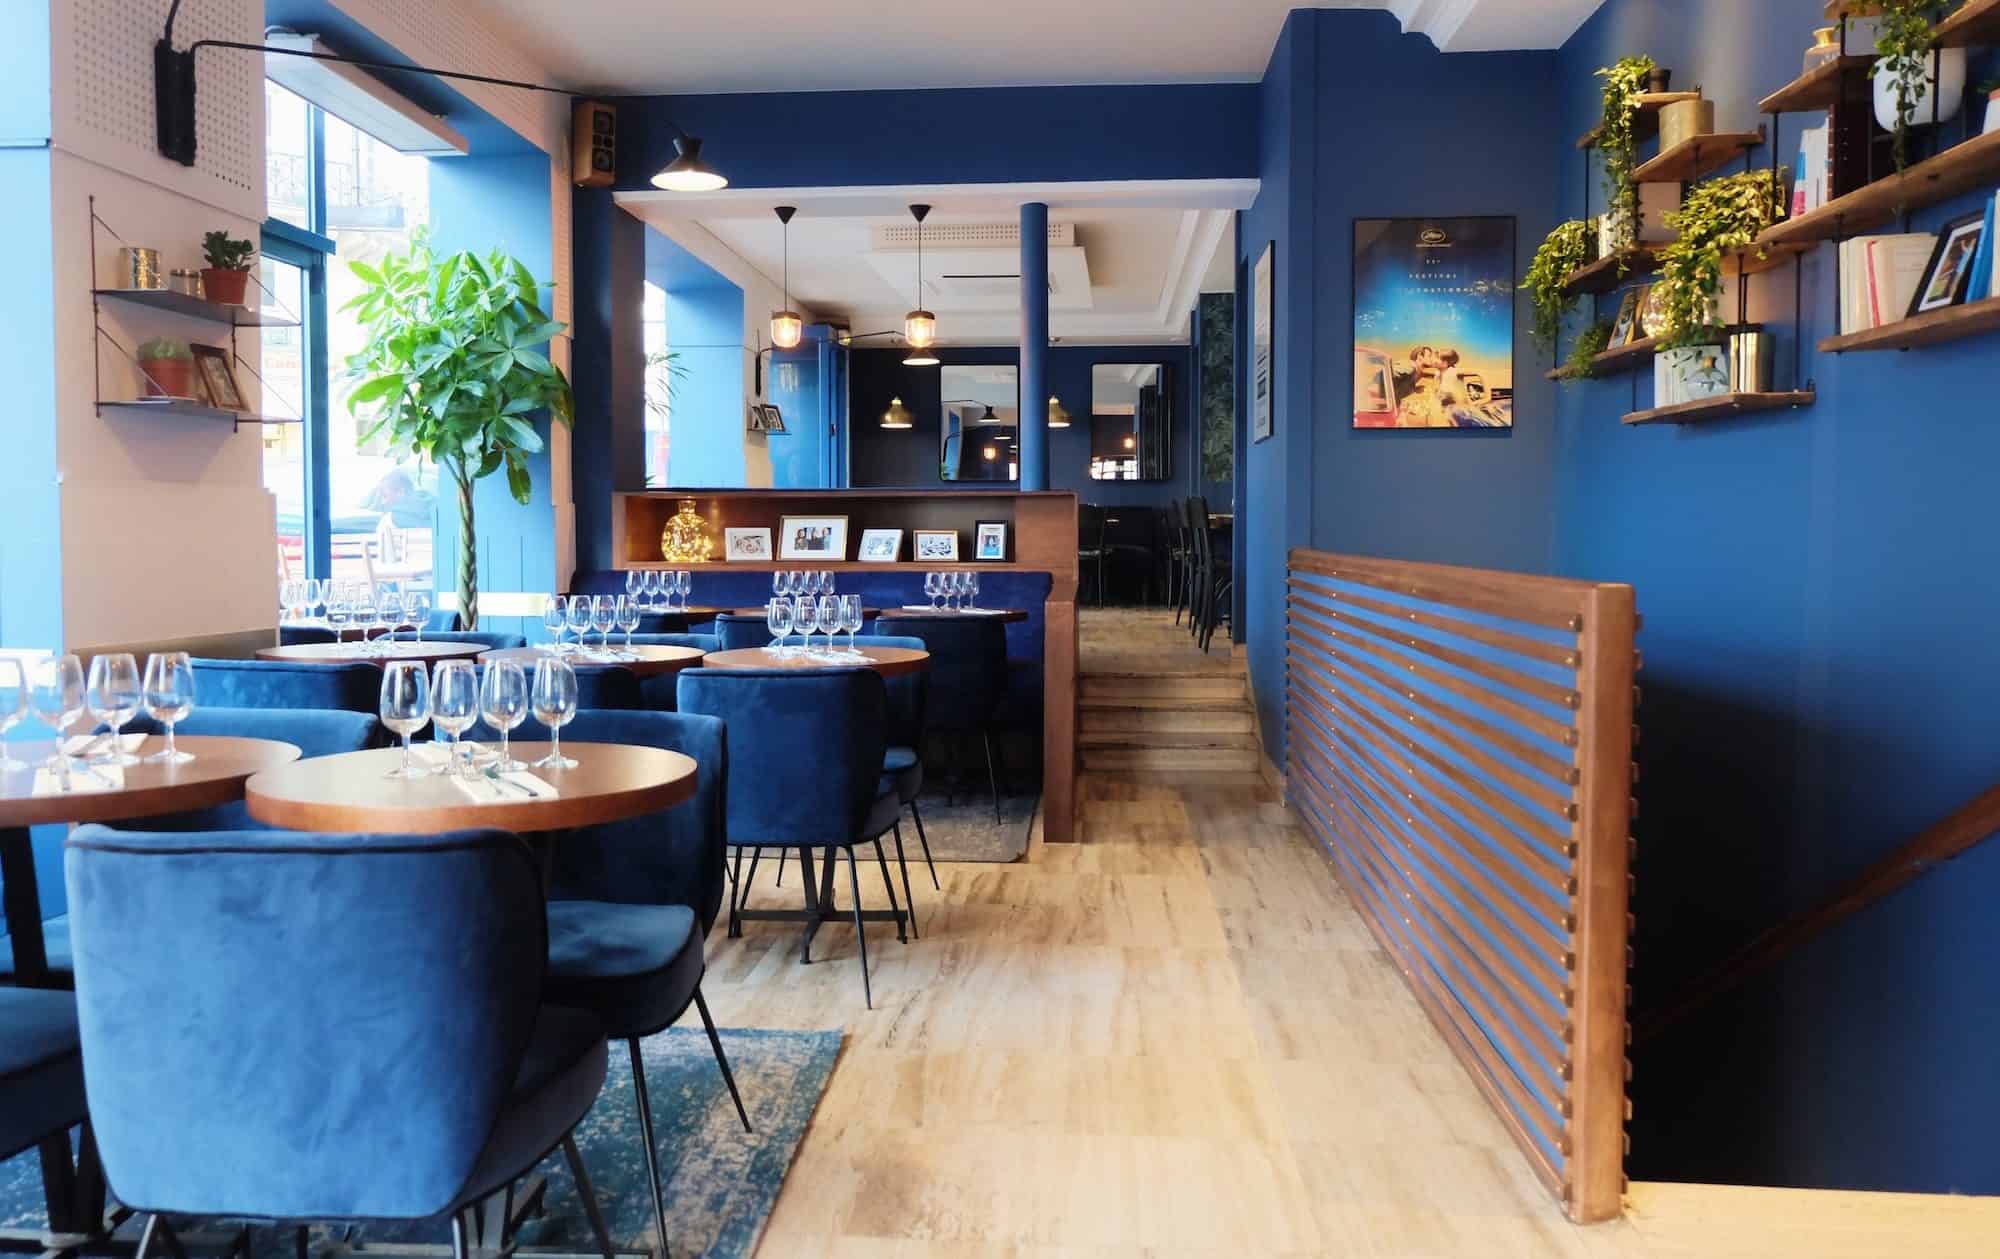 L'Invitée restaurant near Notre Dame Cathedral is one of our favorite spots to eat in Paris for the French food but also for the sleek and cheerful blue interiors